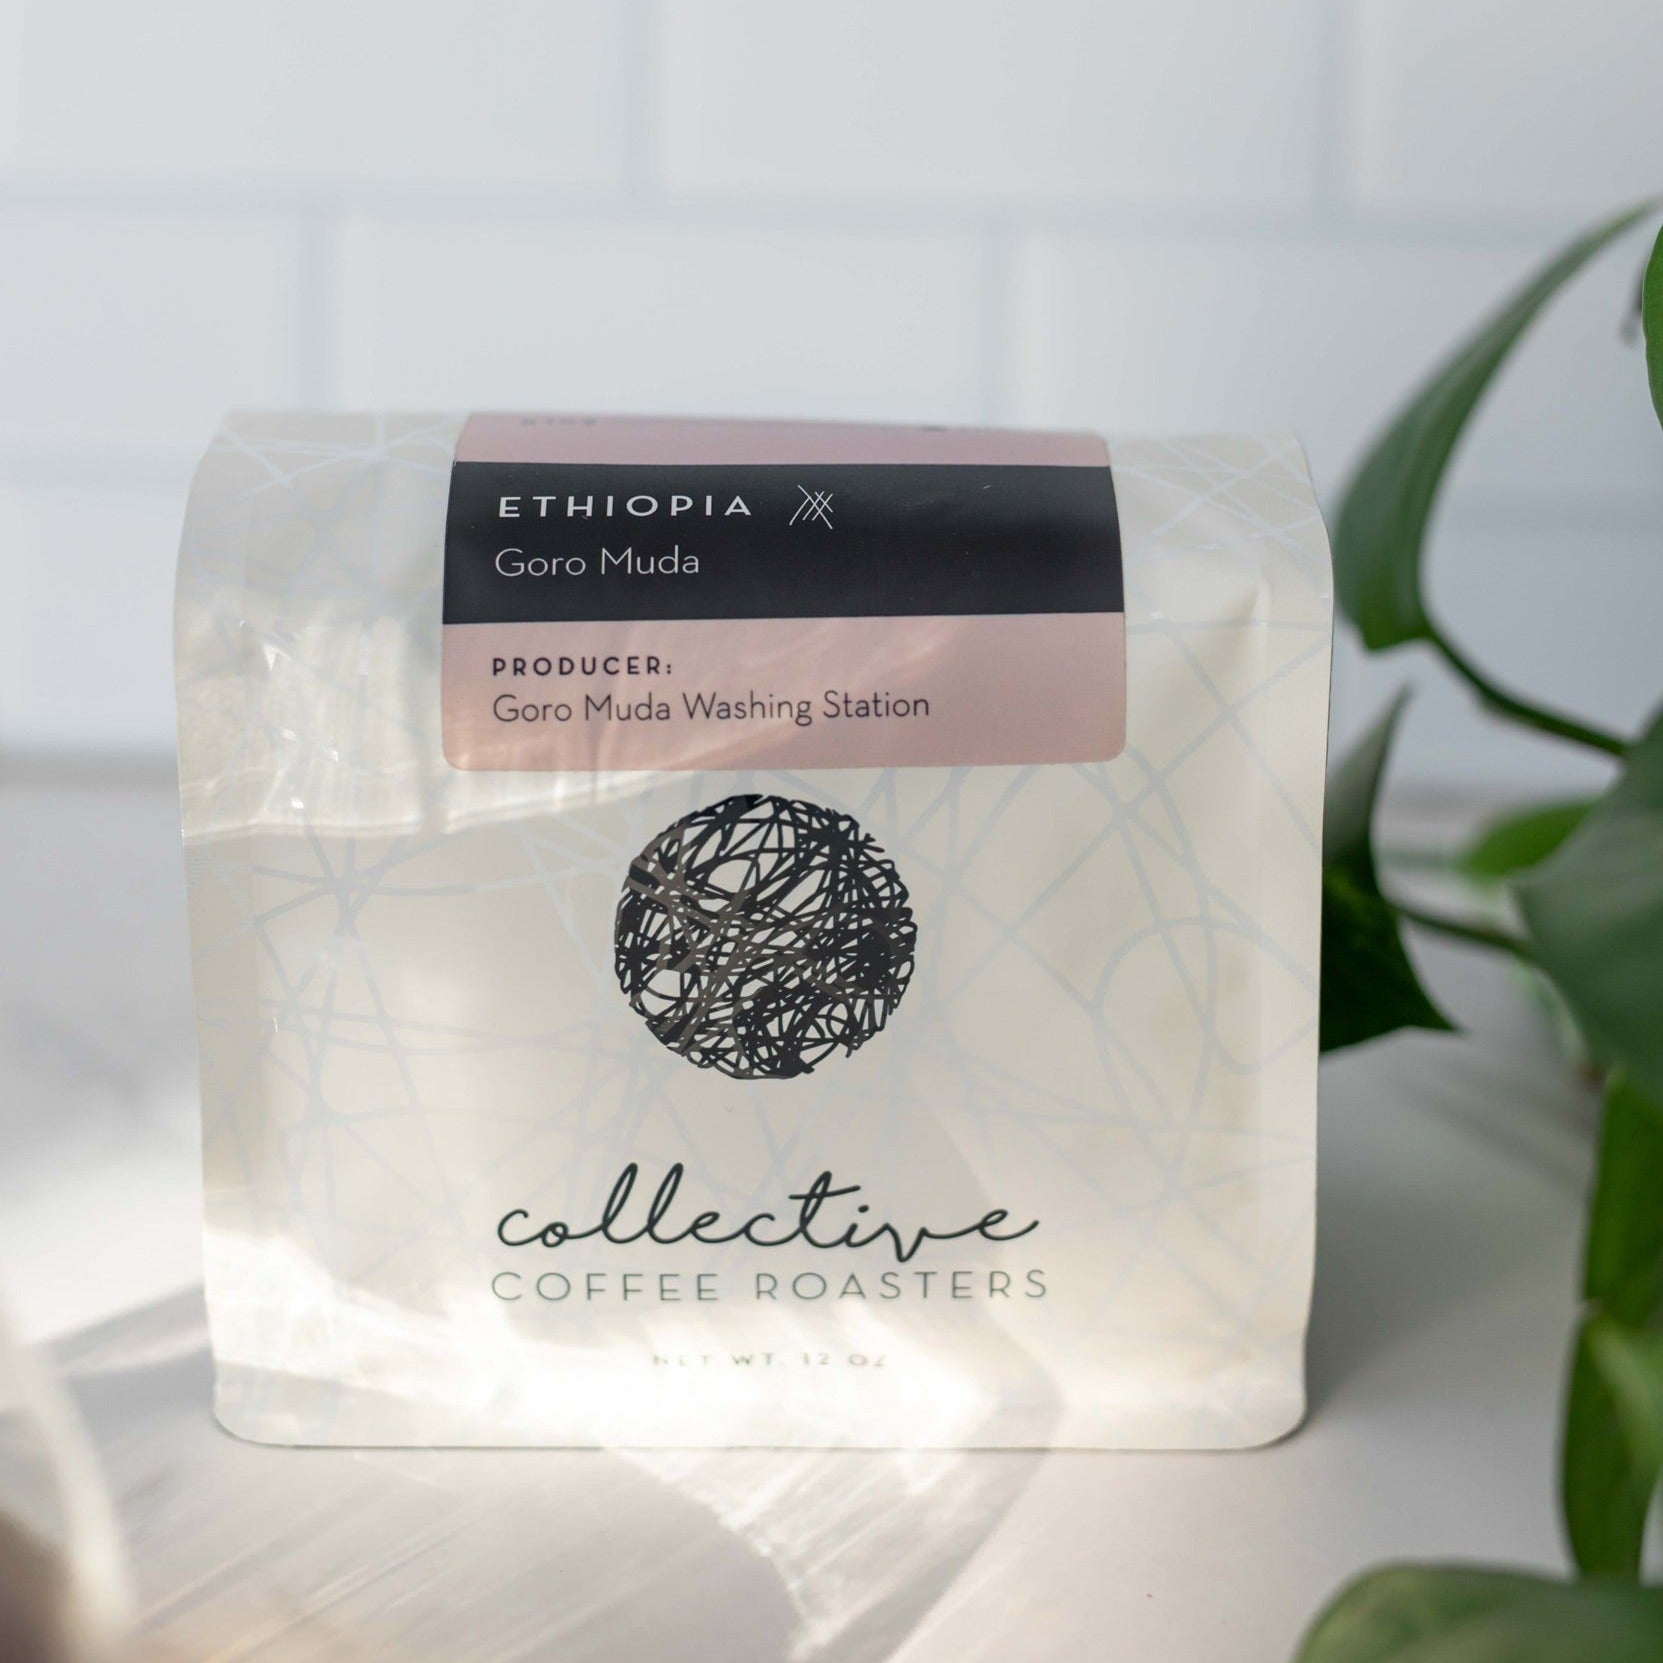 Ethiopia Gora MudaEthiopia Gora MudaCollective Coffee RoastersThis elegant natural coffee from Guji, Ethiopia is produced by the Gora Muda washing station. With notes of strawberry and vanilla soda, this coffee reflects the car